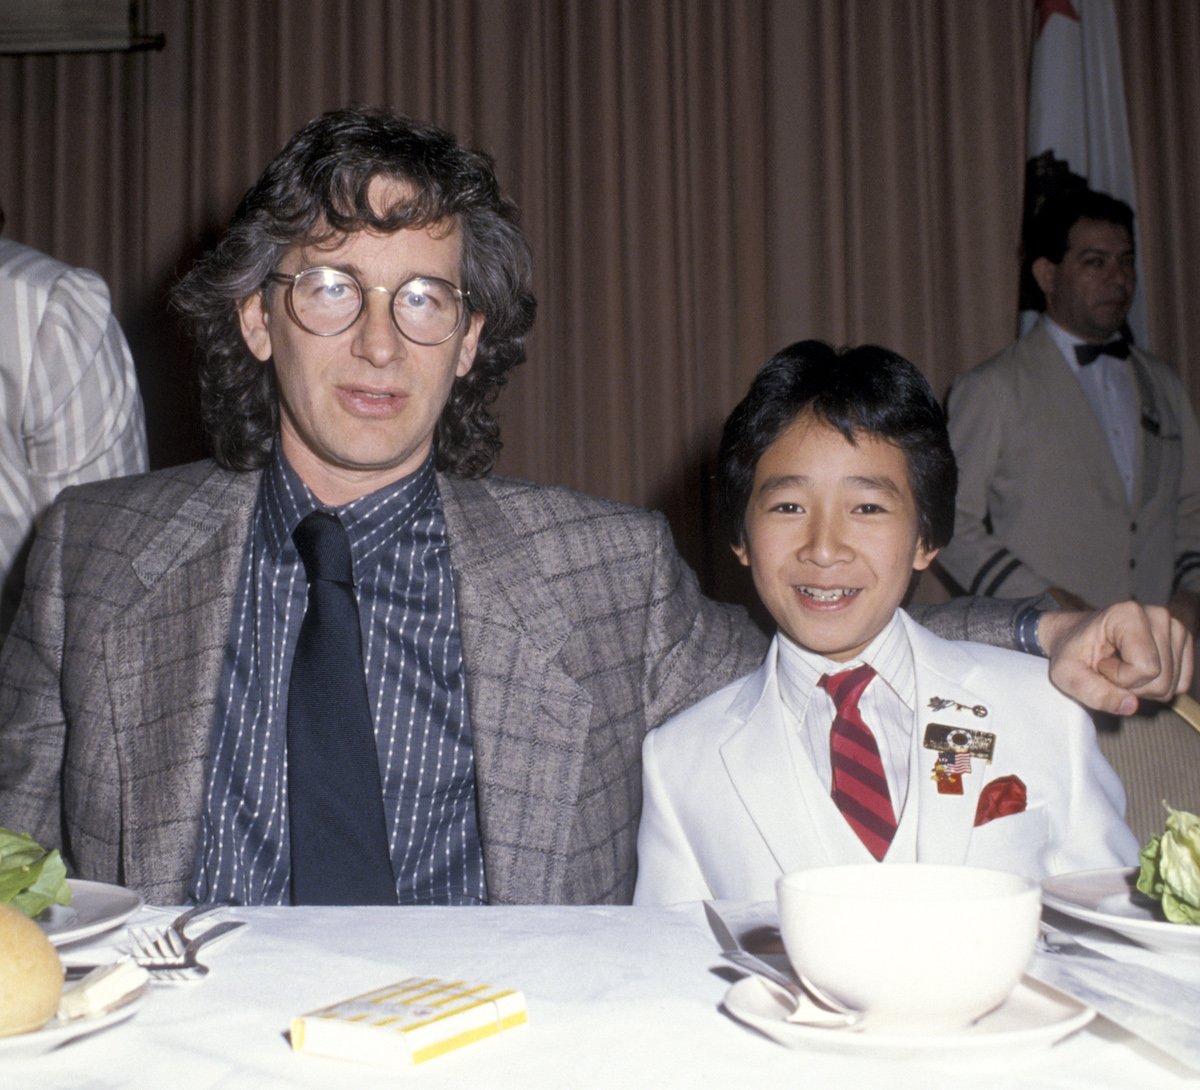 Indiana Jones' Steven Spielberg and Ke Huy Quan smile at a gala in 1985